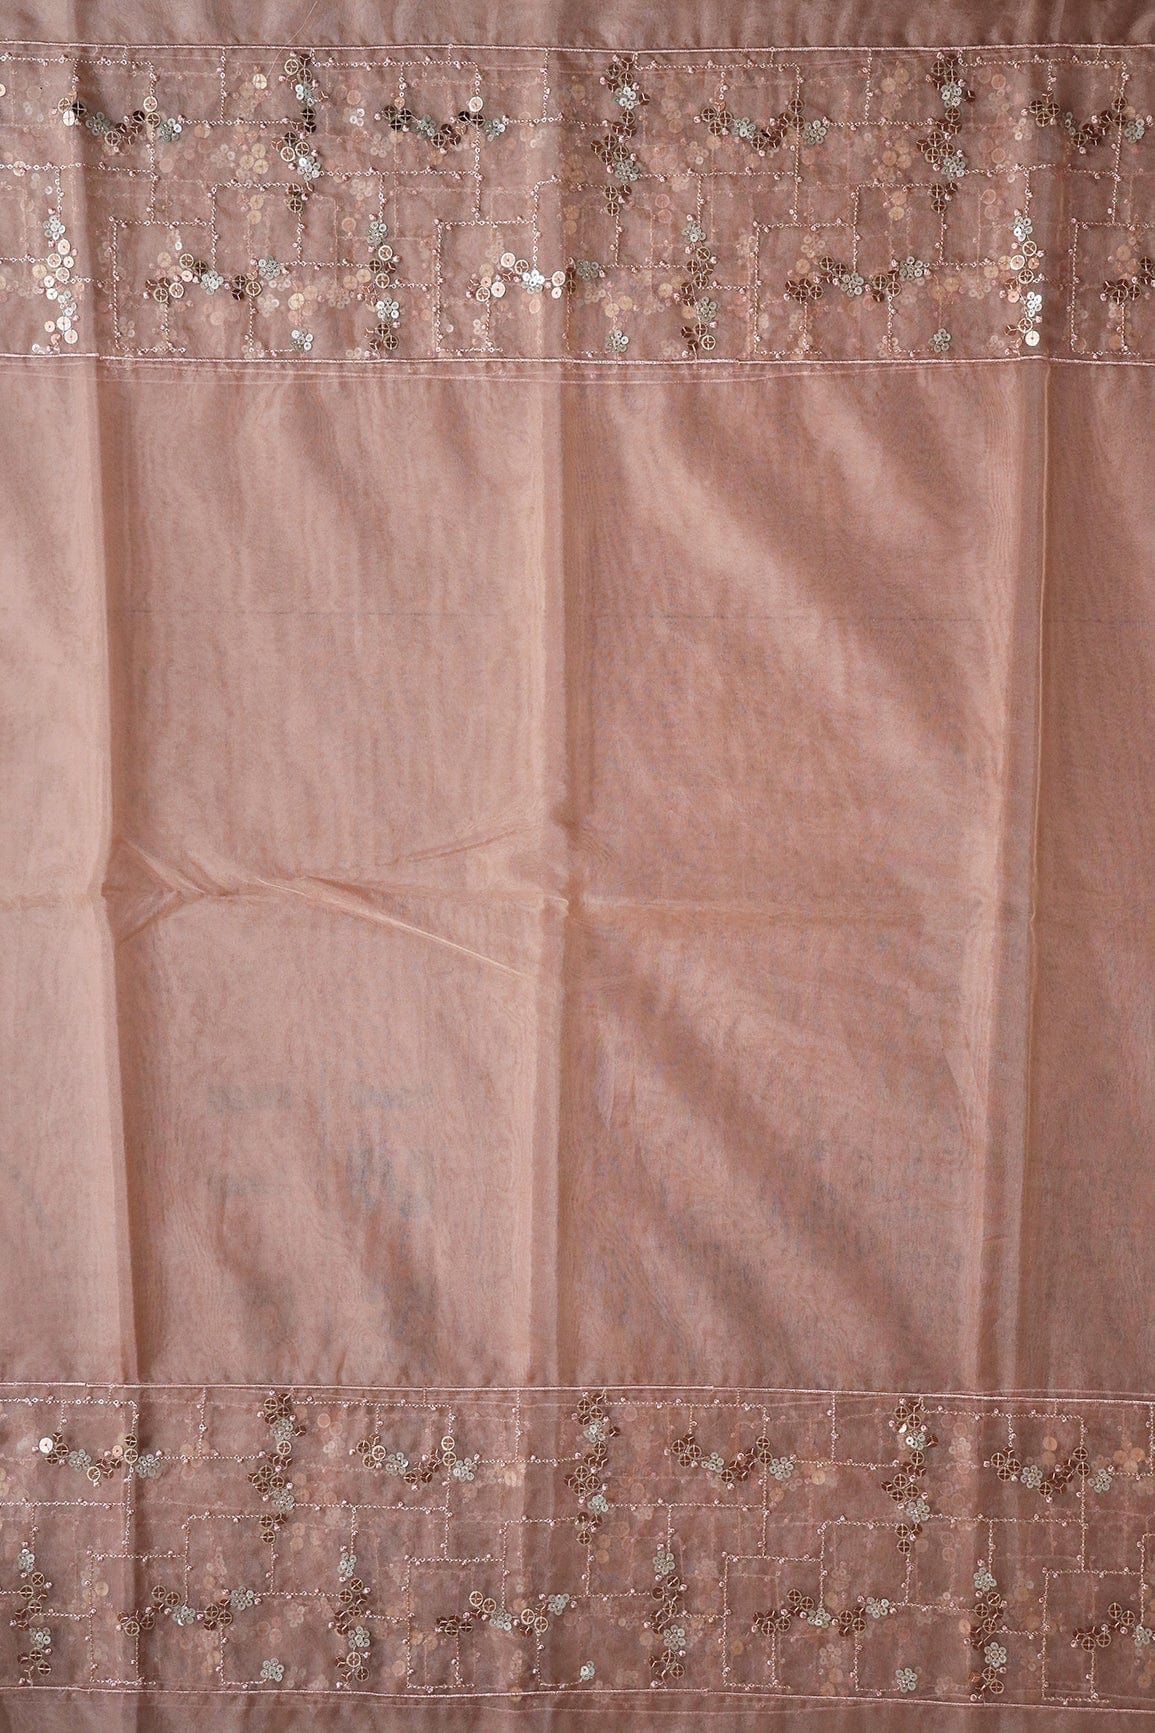 doeraa Embroidery Fabrics 4 Meter Cut Piece Of Multi Sequins With Thread Embroidery On Dusty Peach Organza Fabric